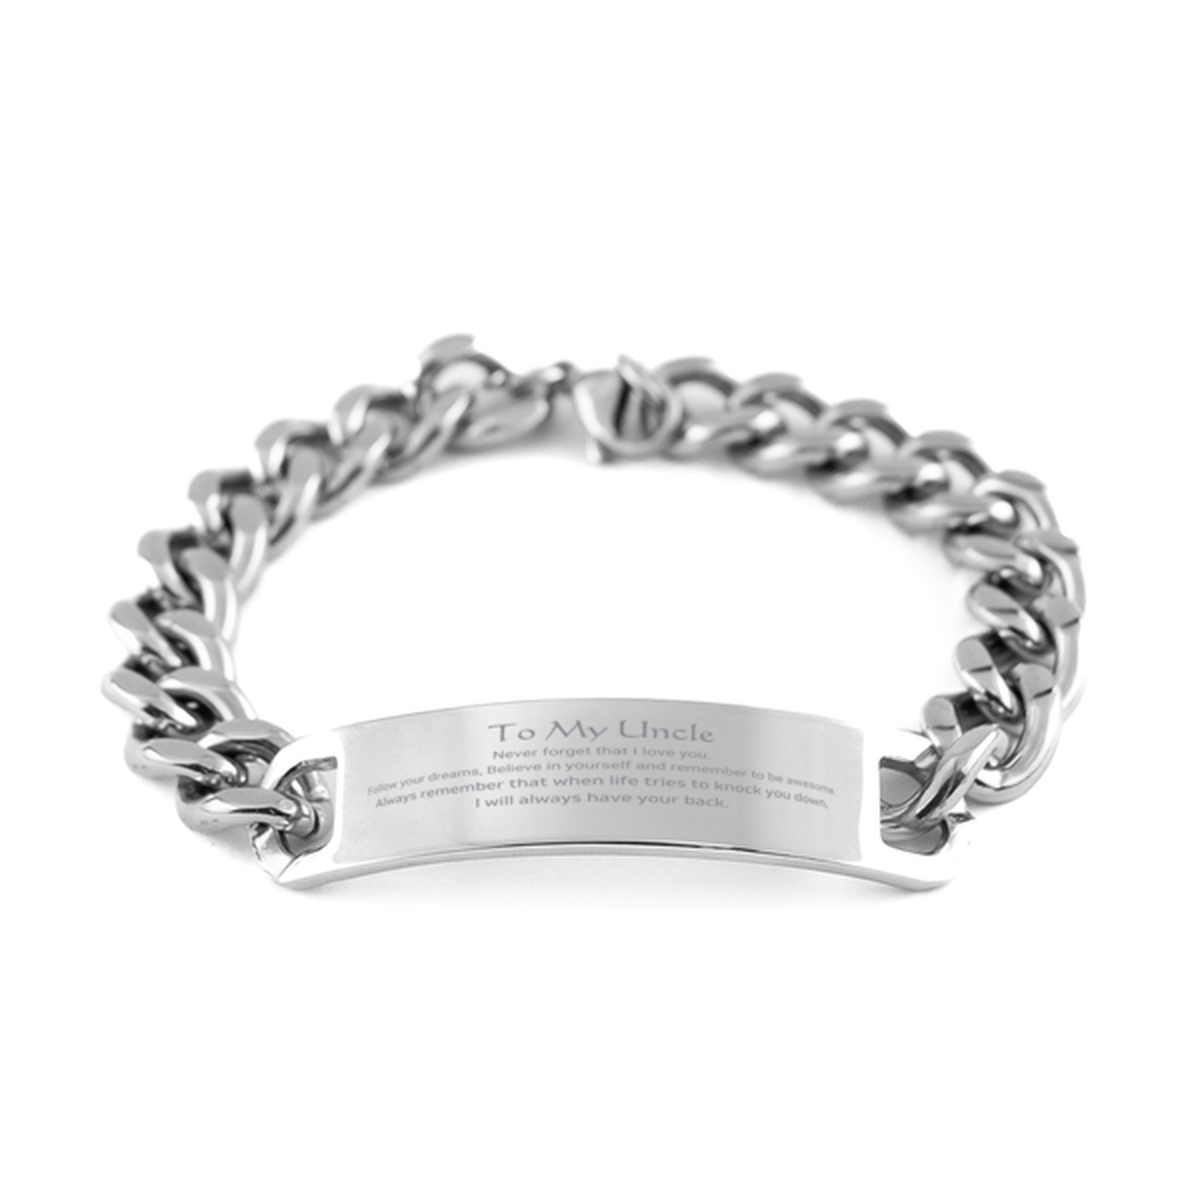 Inspirational Gifts for Uncle, Follow your dreams, Believe in yourself, Uncle Cuban Chain Stainless Steel Bracelet, Birthday Christmas Unique Gifts For Uncle